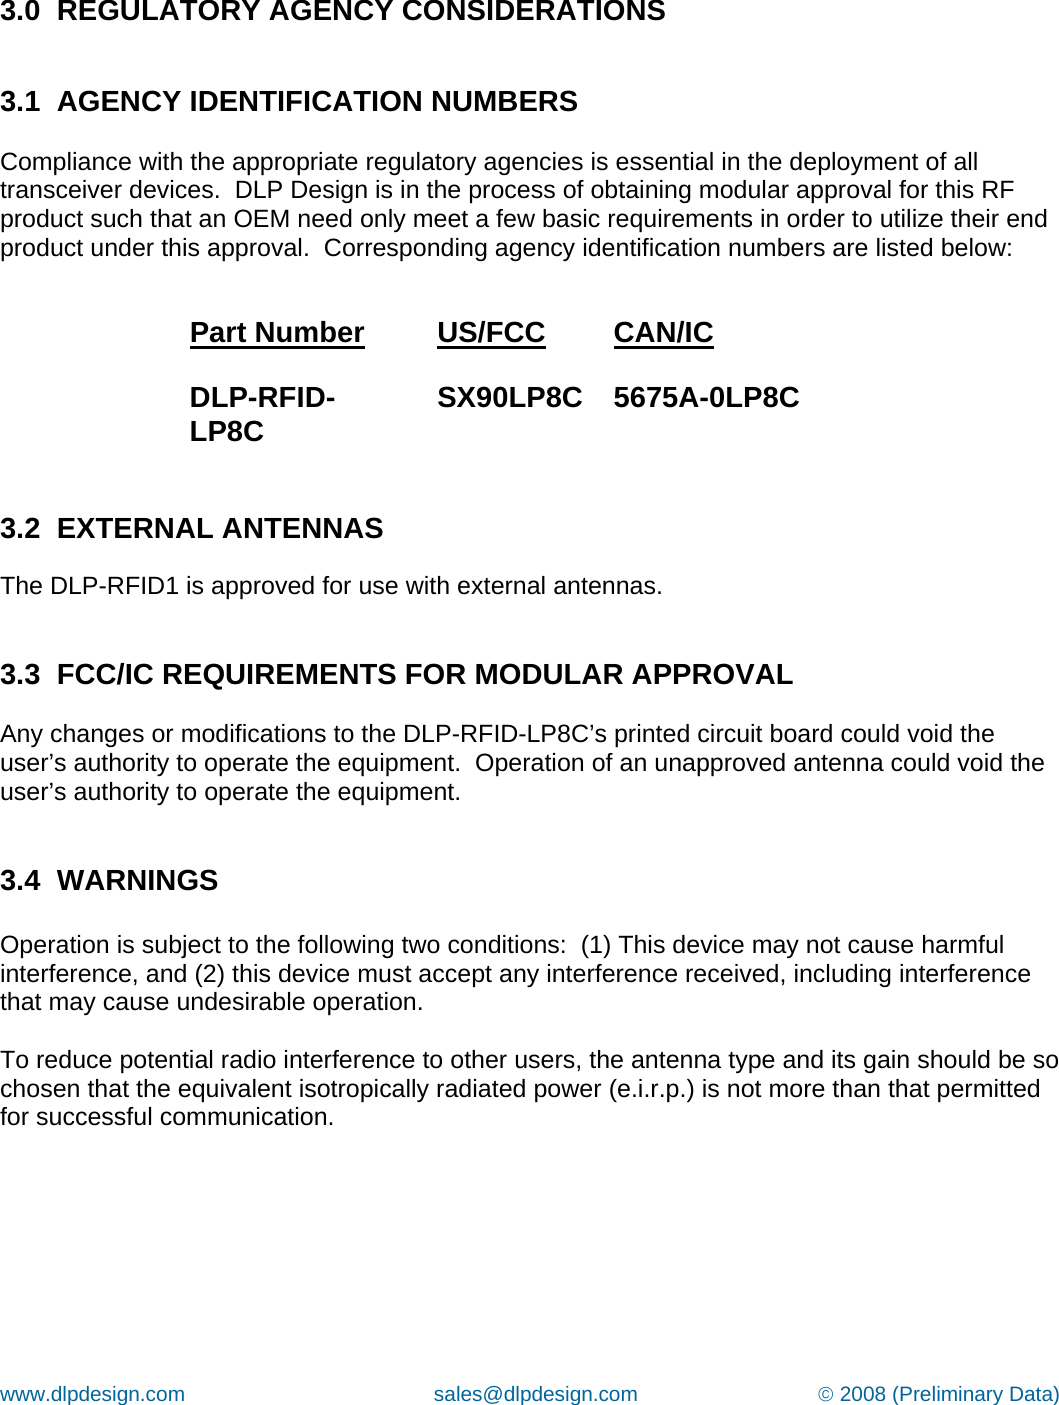 www.dlpdesign.com                                           sales@dlpdesign.com                               © 2008 (Preliminary Data)    3.0  REGULATORY AGENCY CONSIDERATIONS   3.1  AGENCY IDENTIFICATION NUMBERS  Compliance with the appropriate regulatory agencies is essential in the deployment of all transceiver devices.  DLP Design is in the process of obtaining modular approval for this RF product such that an OEM need only meet a few basic requirements in order to utilize their end product under this approval.  Corresponding agency identification numbers are listed below:  Part Number         US/FCC  CAN/IC  DLP-RFID-LP8C        SX90LP8C  5675A-0LP8C   3.2  EXTERNAL ANTENNAS   The DLP-RFID1 is approved for use with external antennas.     3.3  FCC/IC REQUIREMENTS FOR MODULAR APPROVAL  Any changes or modifications to the DLP-RFID-LP8C’s printed circuit board could void the user’s authority to operate the equipment.  Operation of an unapproved antenna could void the user’s authority to operate the equipment.   3.4  WARNINGS  Operation is subject to the following two conditions:  (1) This device may not cause harmful interference, and (2) this device must accept any interference received, including interference that may cause undesirable operation.  To reduce potential radio interference to other users, the antenna type and its gain should be so chosen that the equivalent isotropically radiated power (e.i.r.p.) is not more than that permitted for successful communication.   